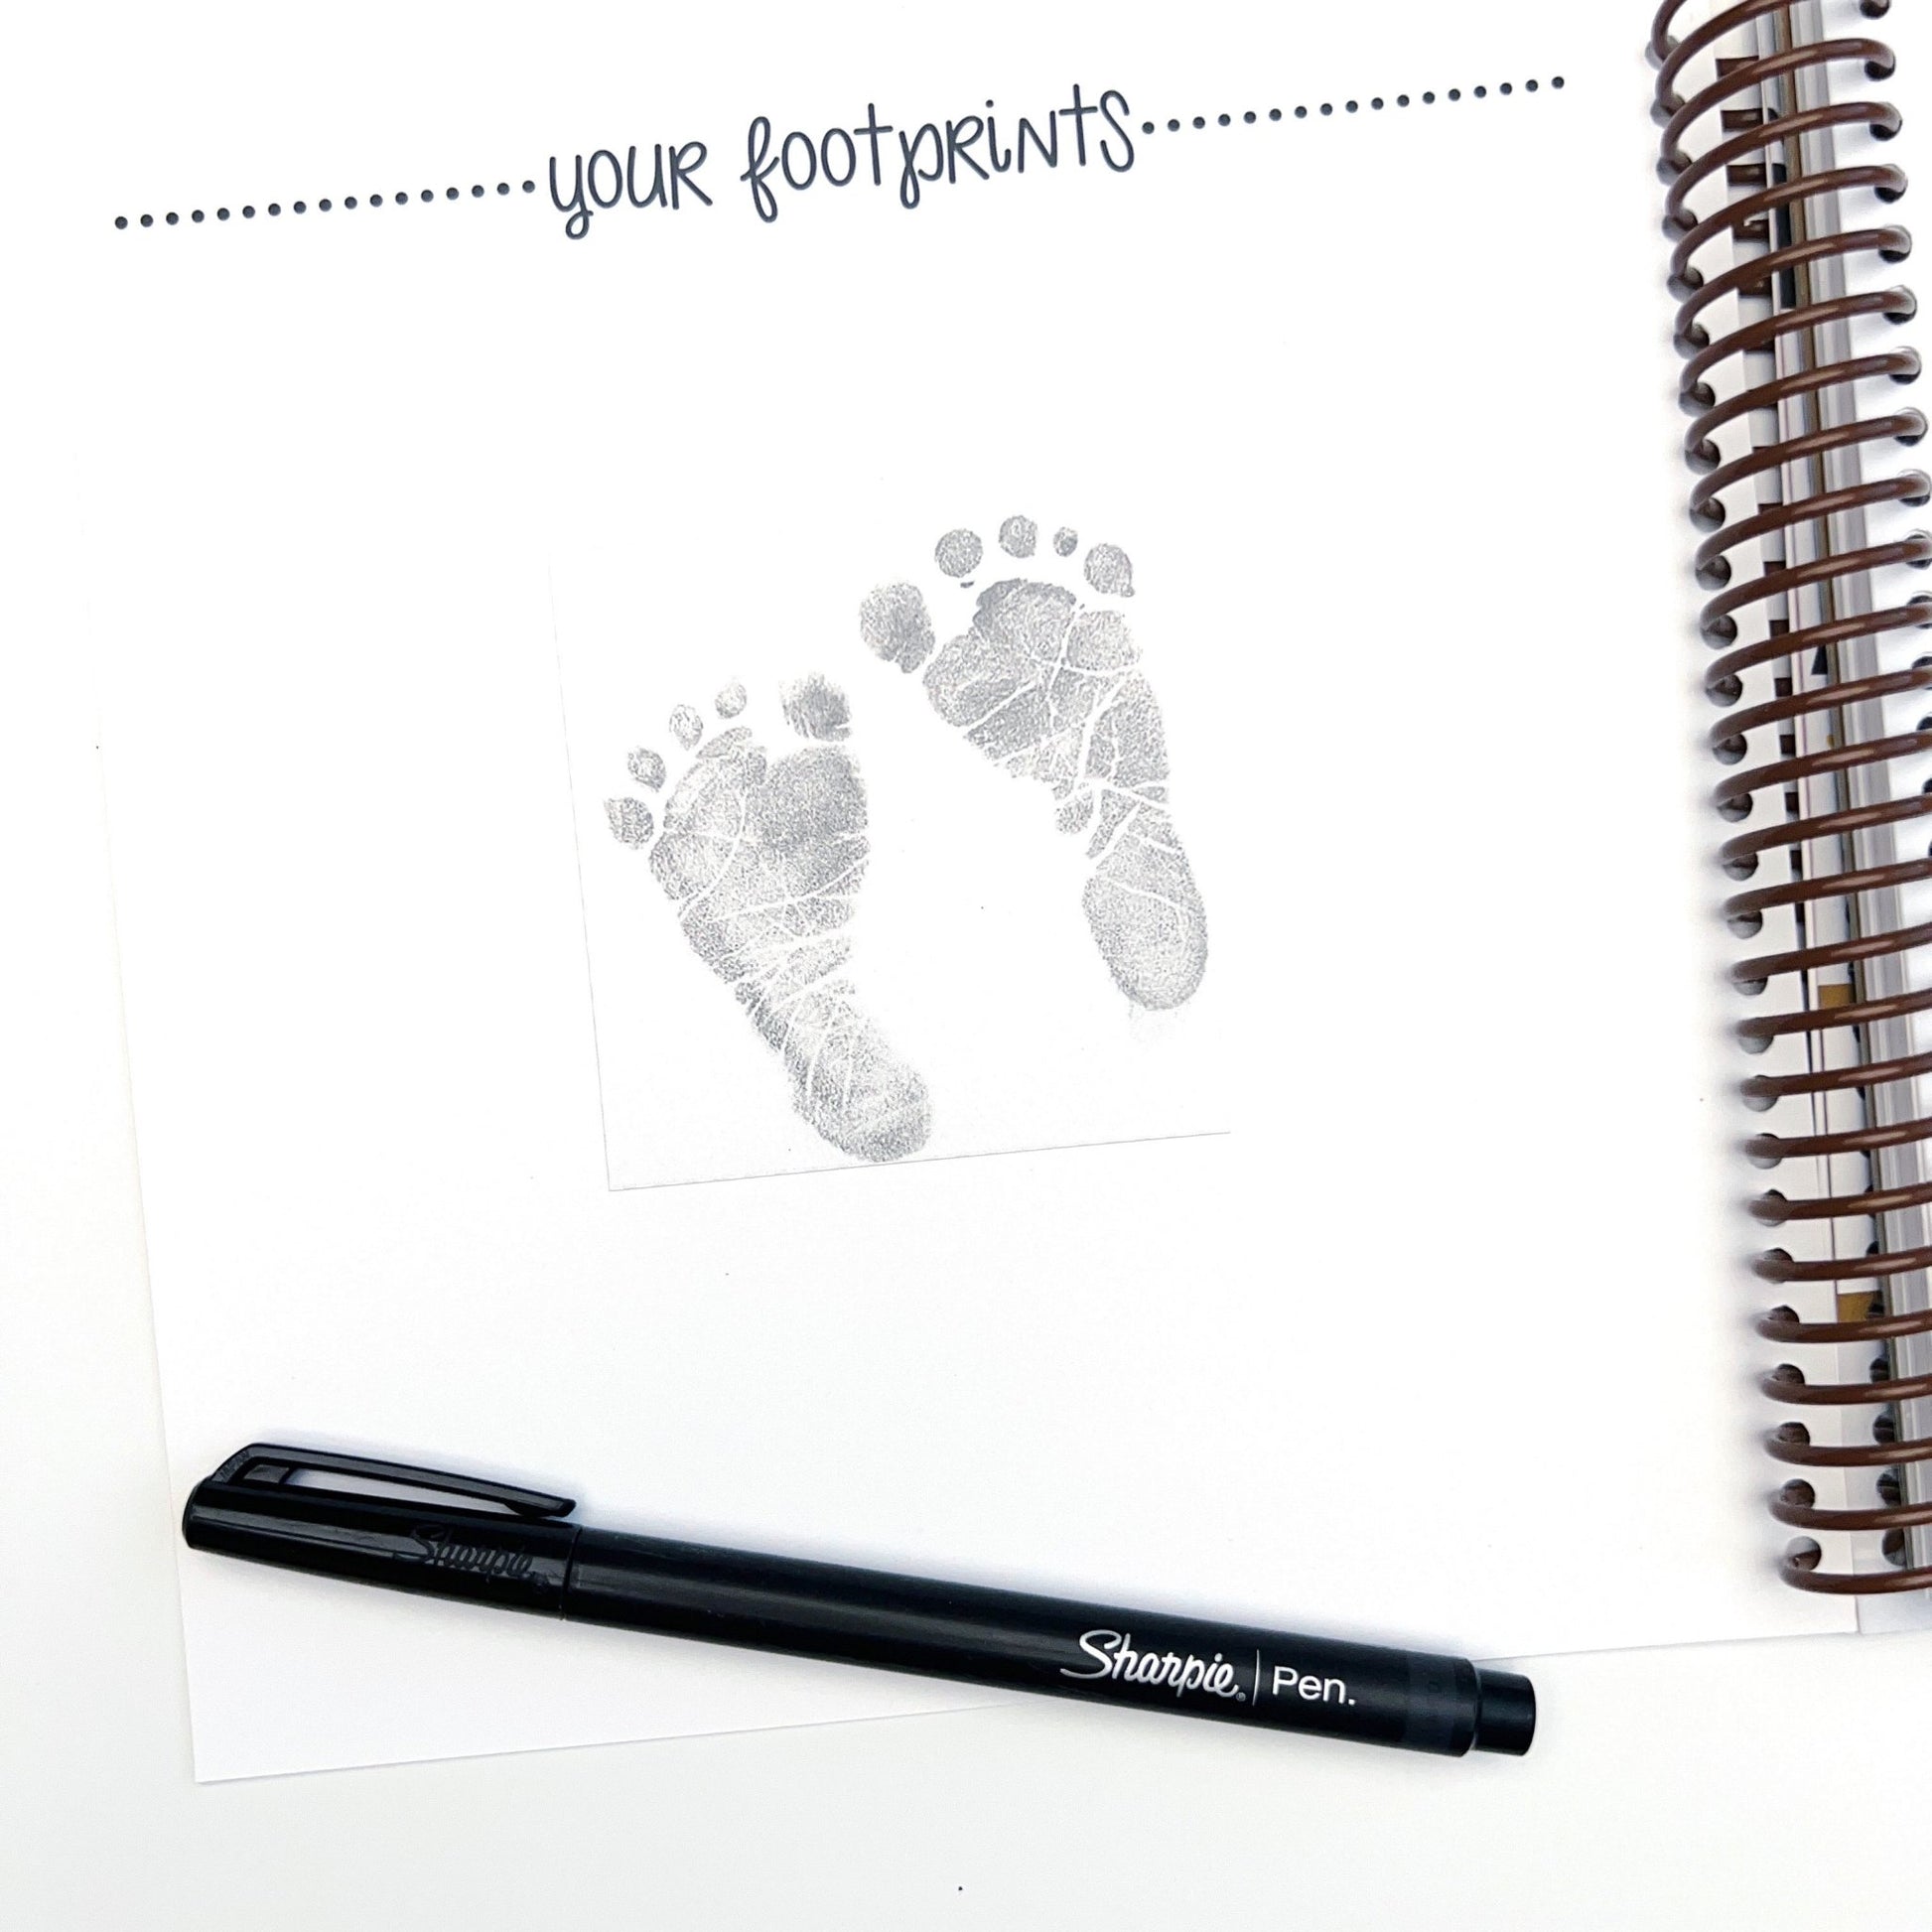 Page to place babys footprints. Make sure you bring this in your hospital bag so you can get babys prints in the book.